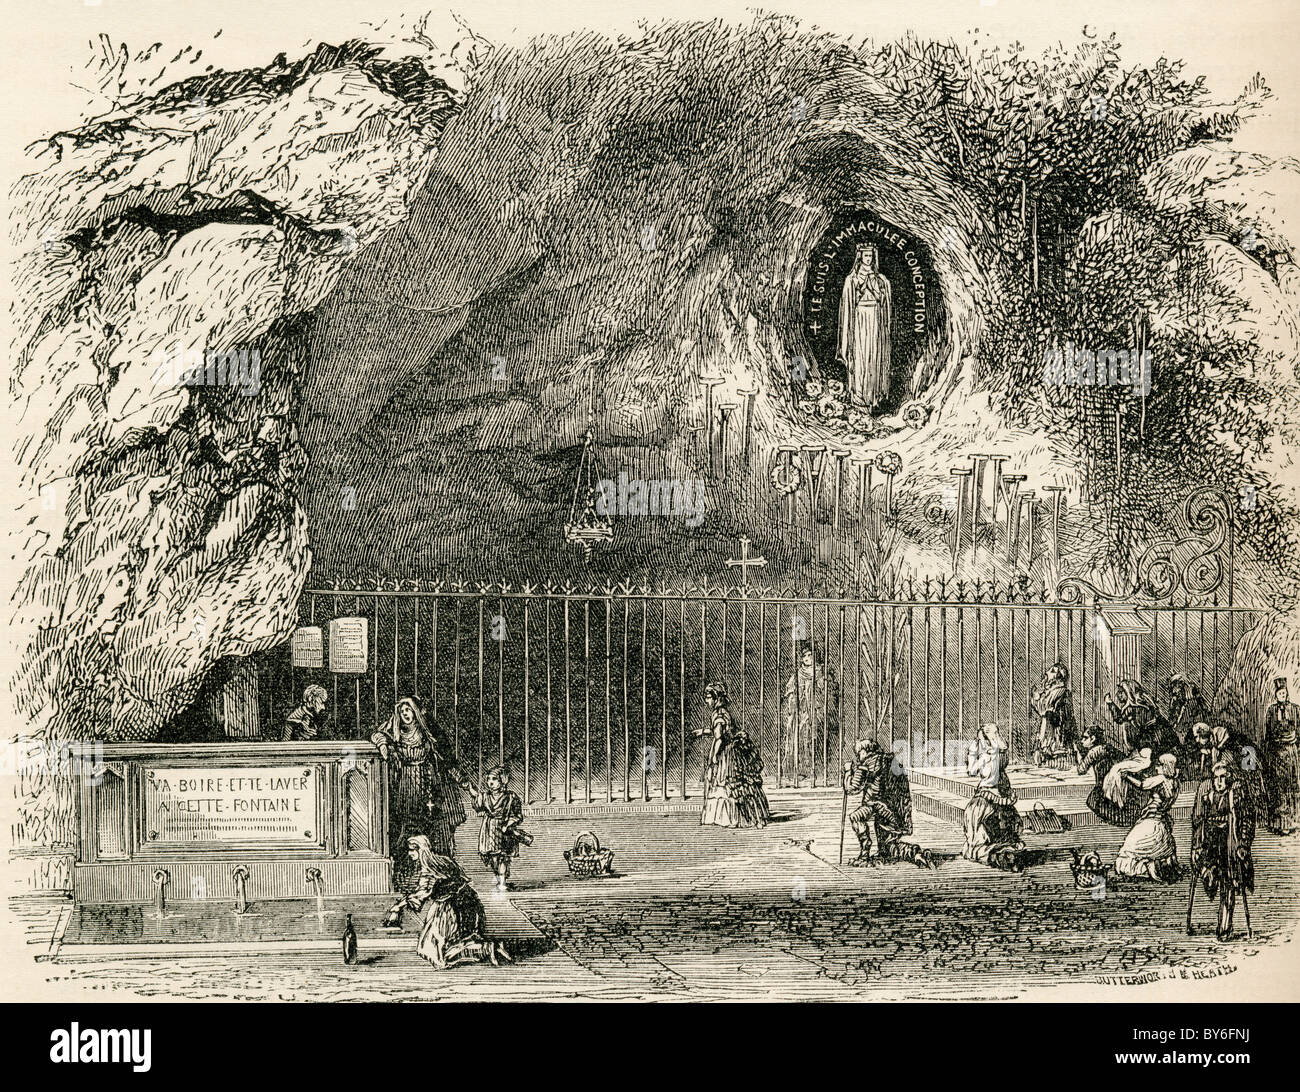 Grotto of Massabielle in the Sanctuary of Our Lady of Lourdes, France in the 19th century. Stock Photo